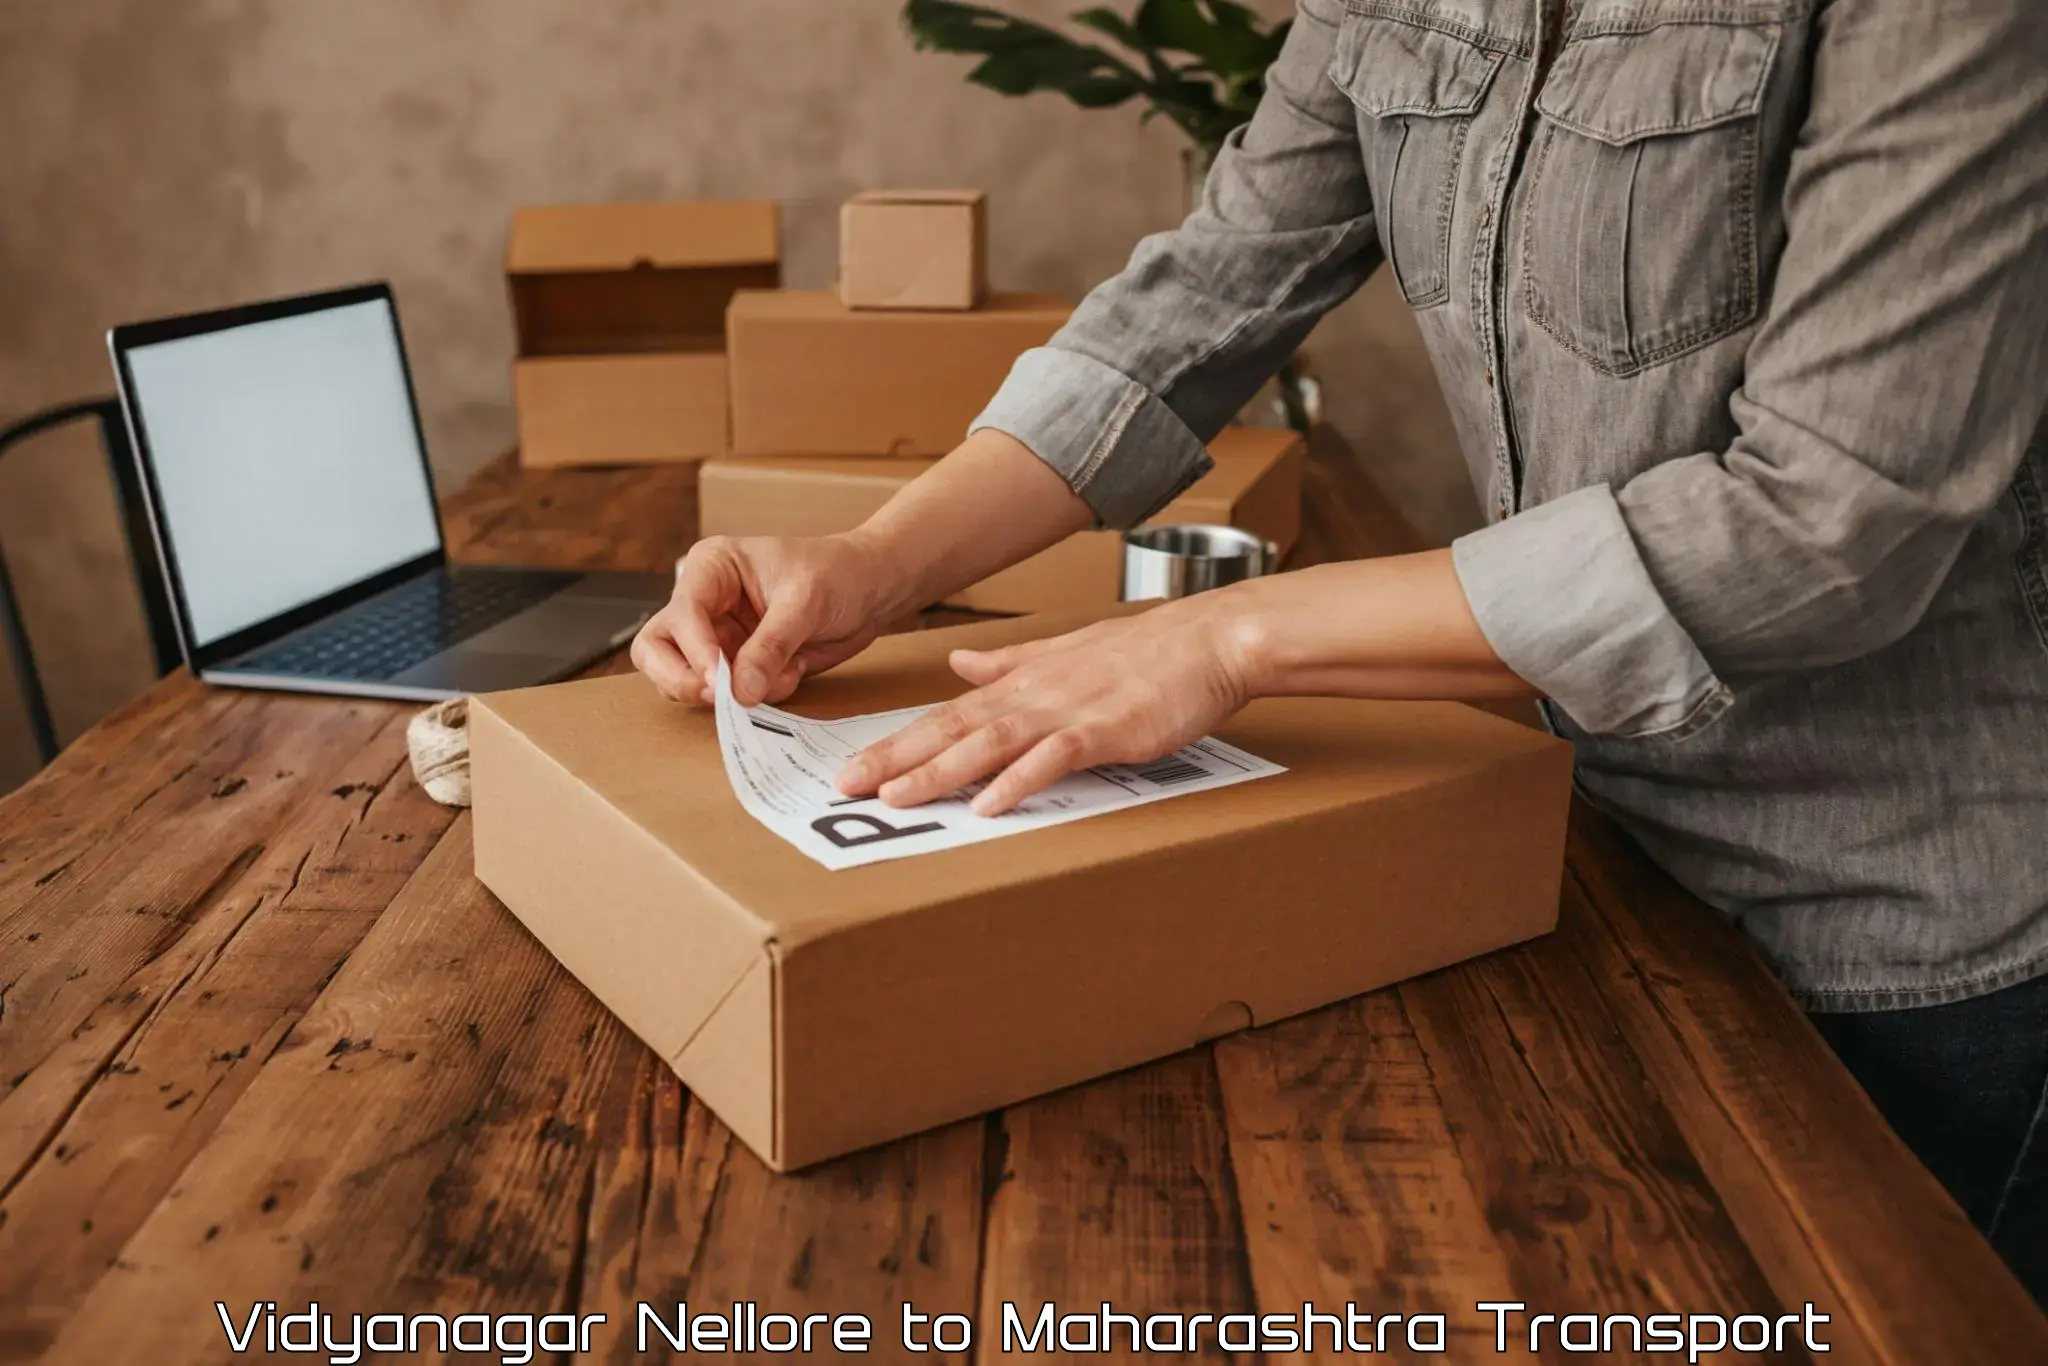 Domestic goods transportation services in Vidyanagar Nellore to Madgyal